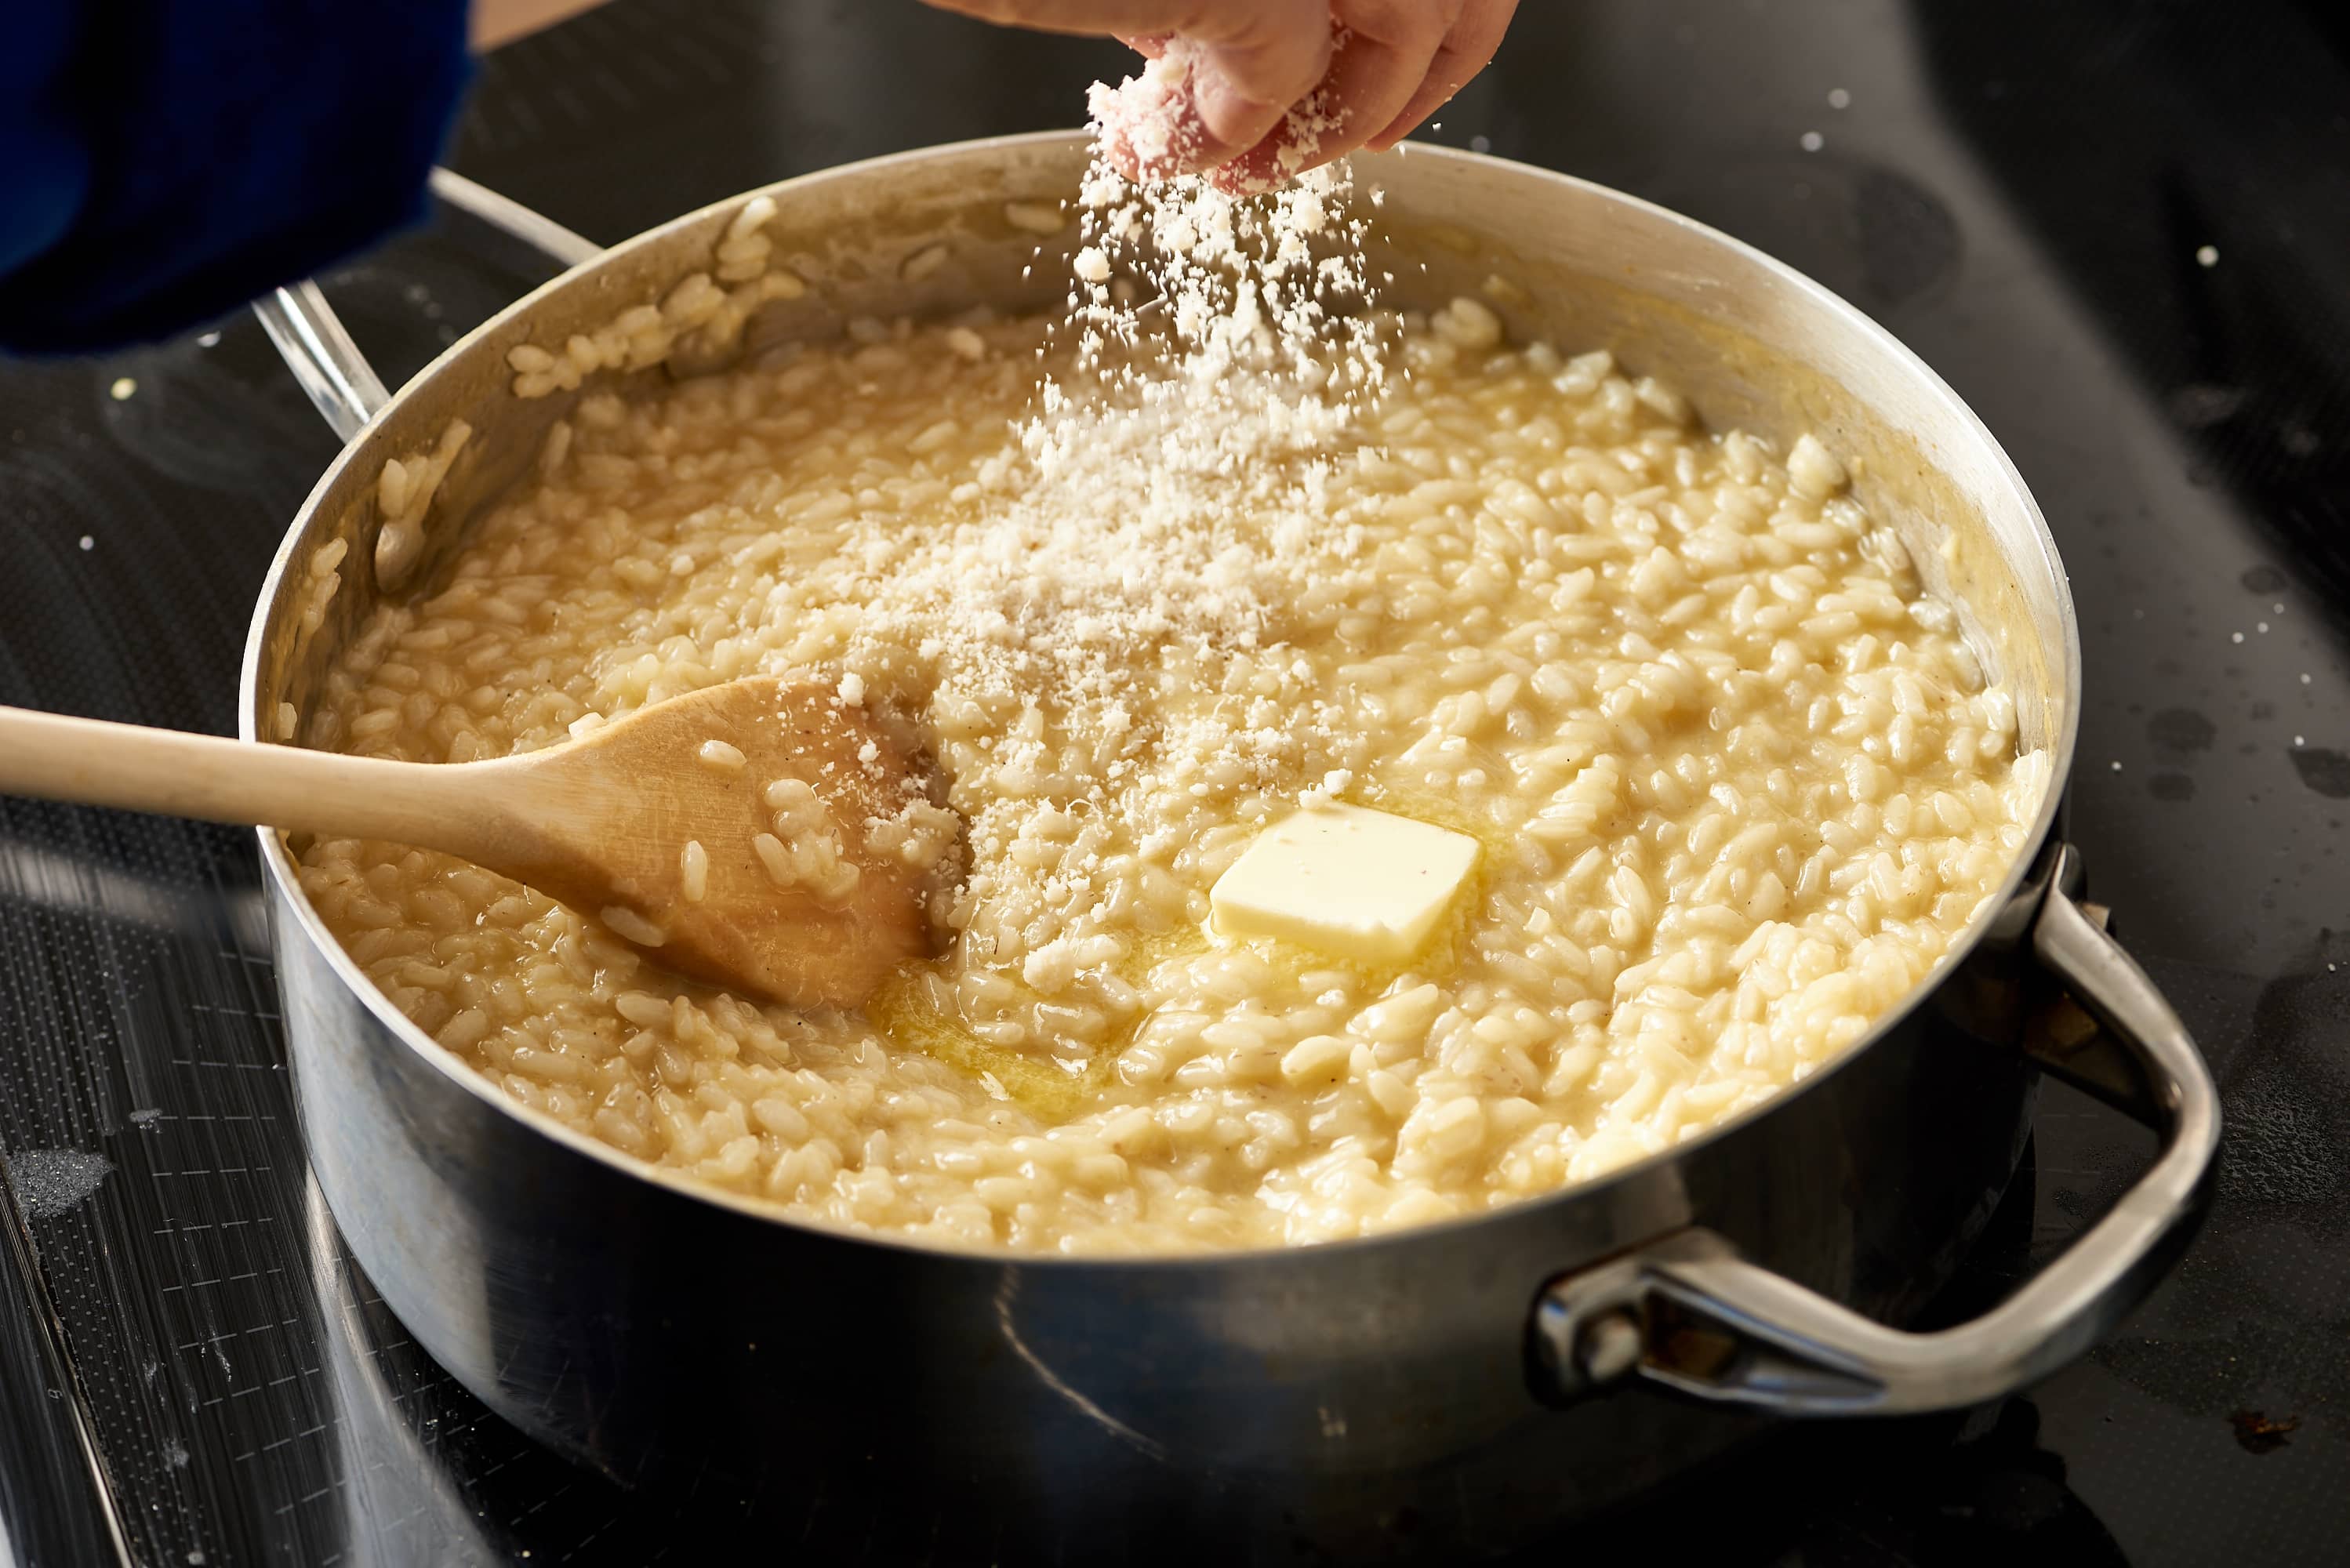 How To Make Risotto - Risotto Recipe at Home | Kitchn